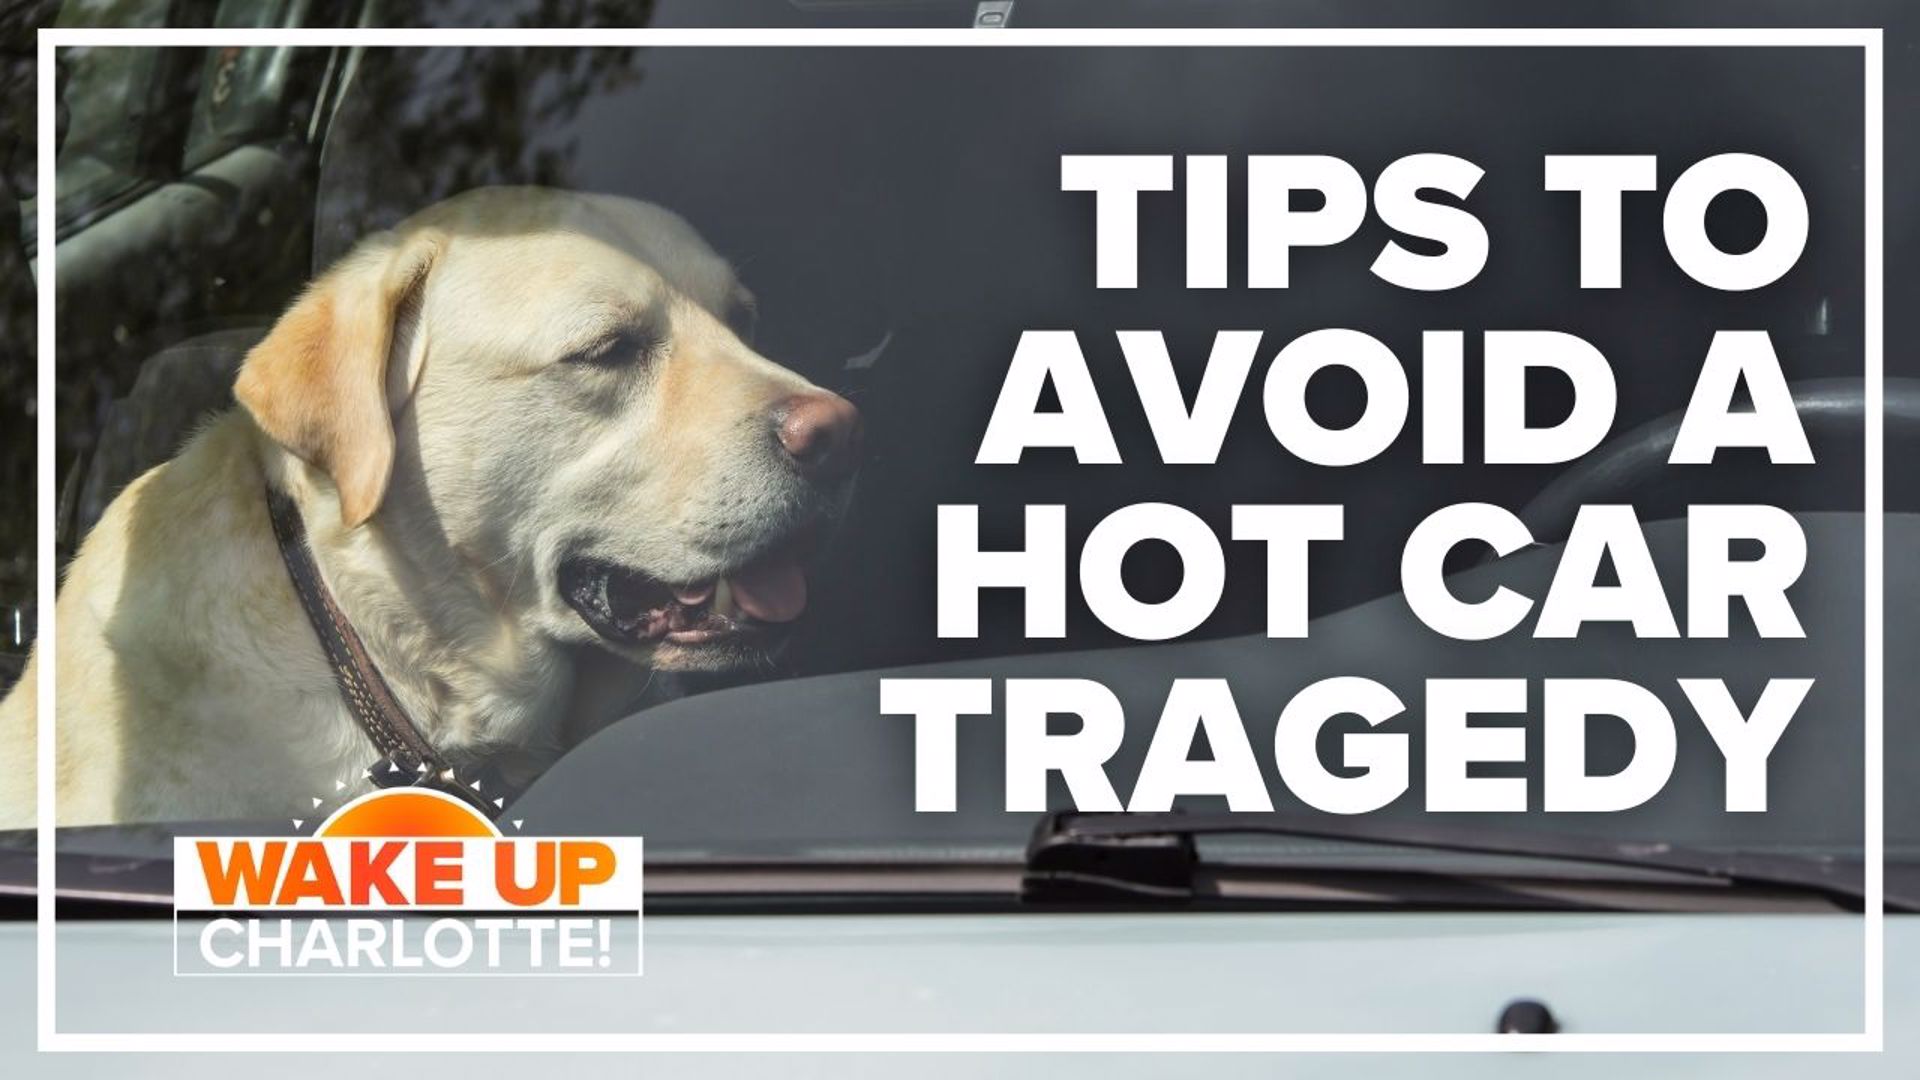 Parents know the dangers of leaving their kids or pets in a hot car on a warm day, but if you think it can't happen to you, think again.